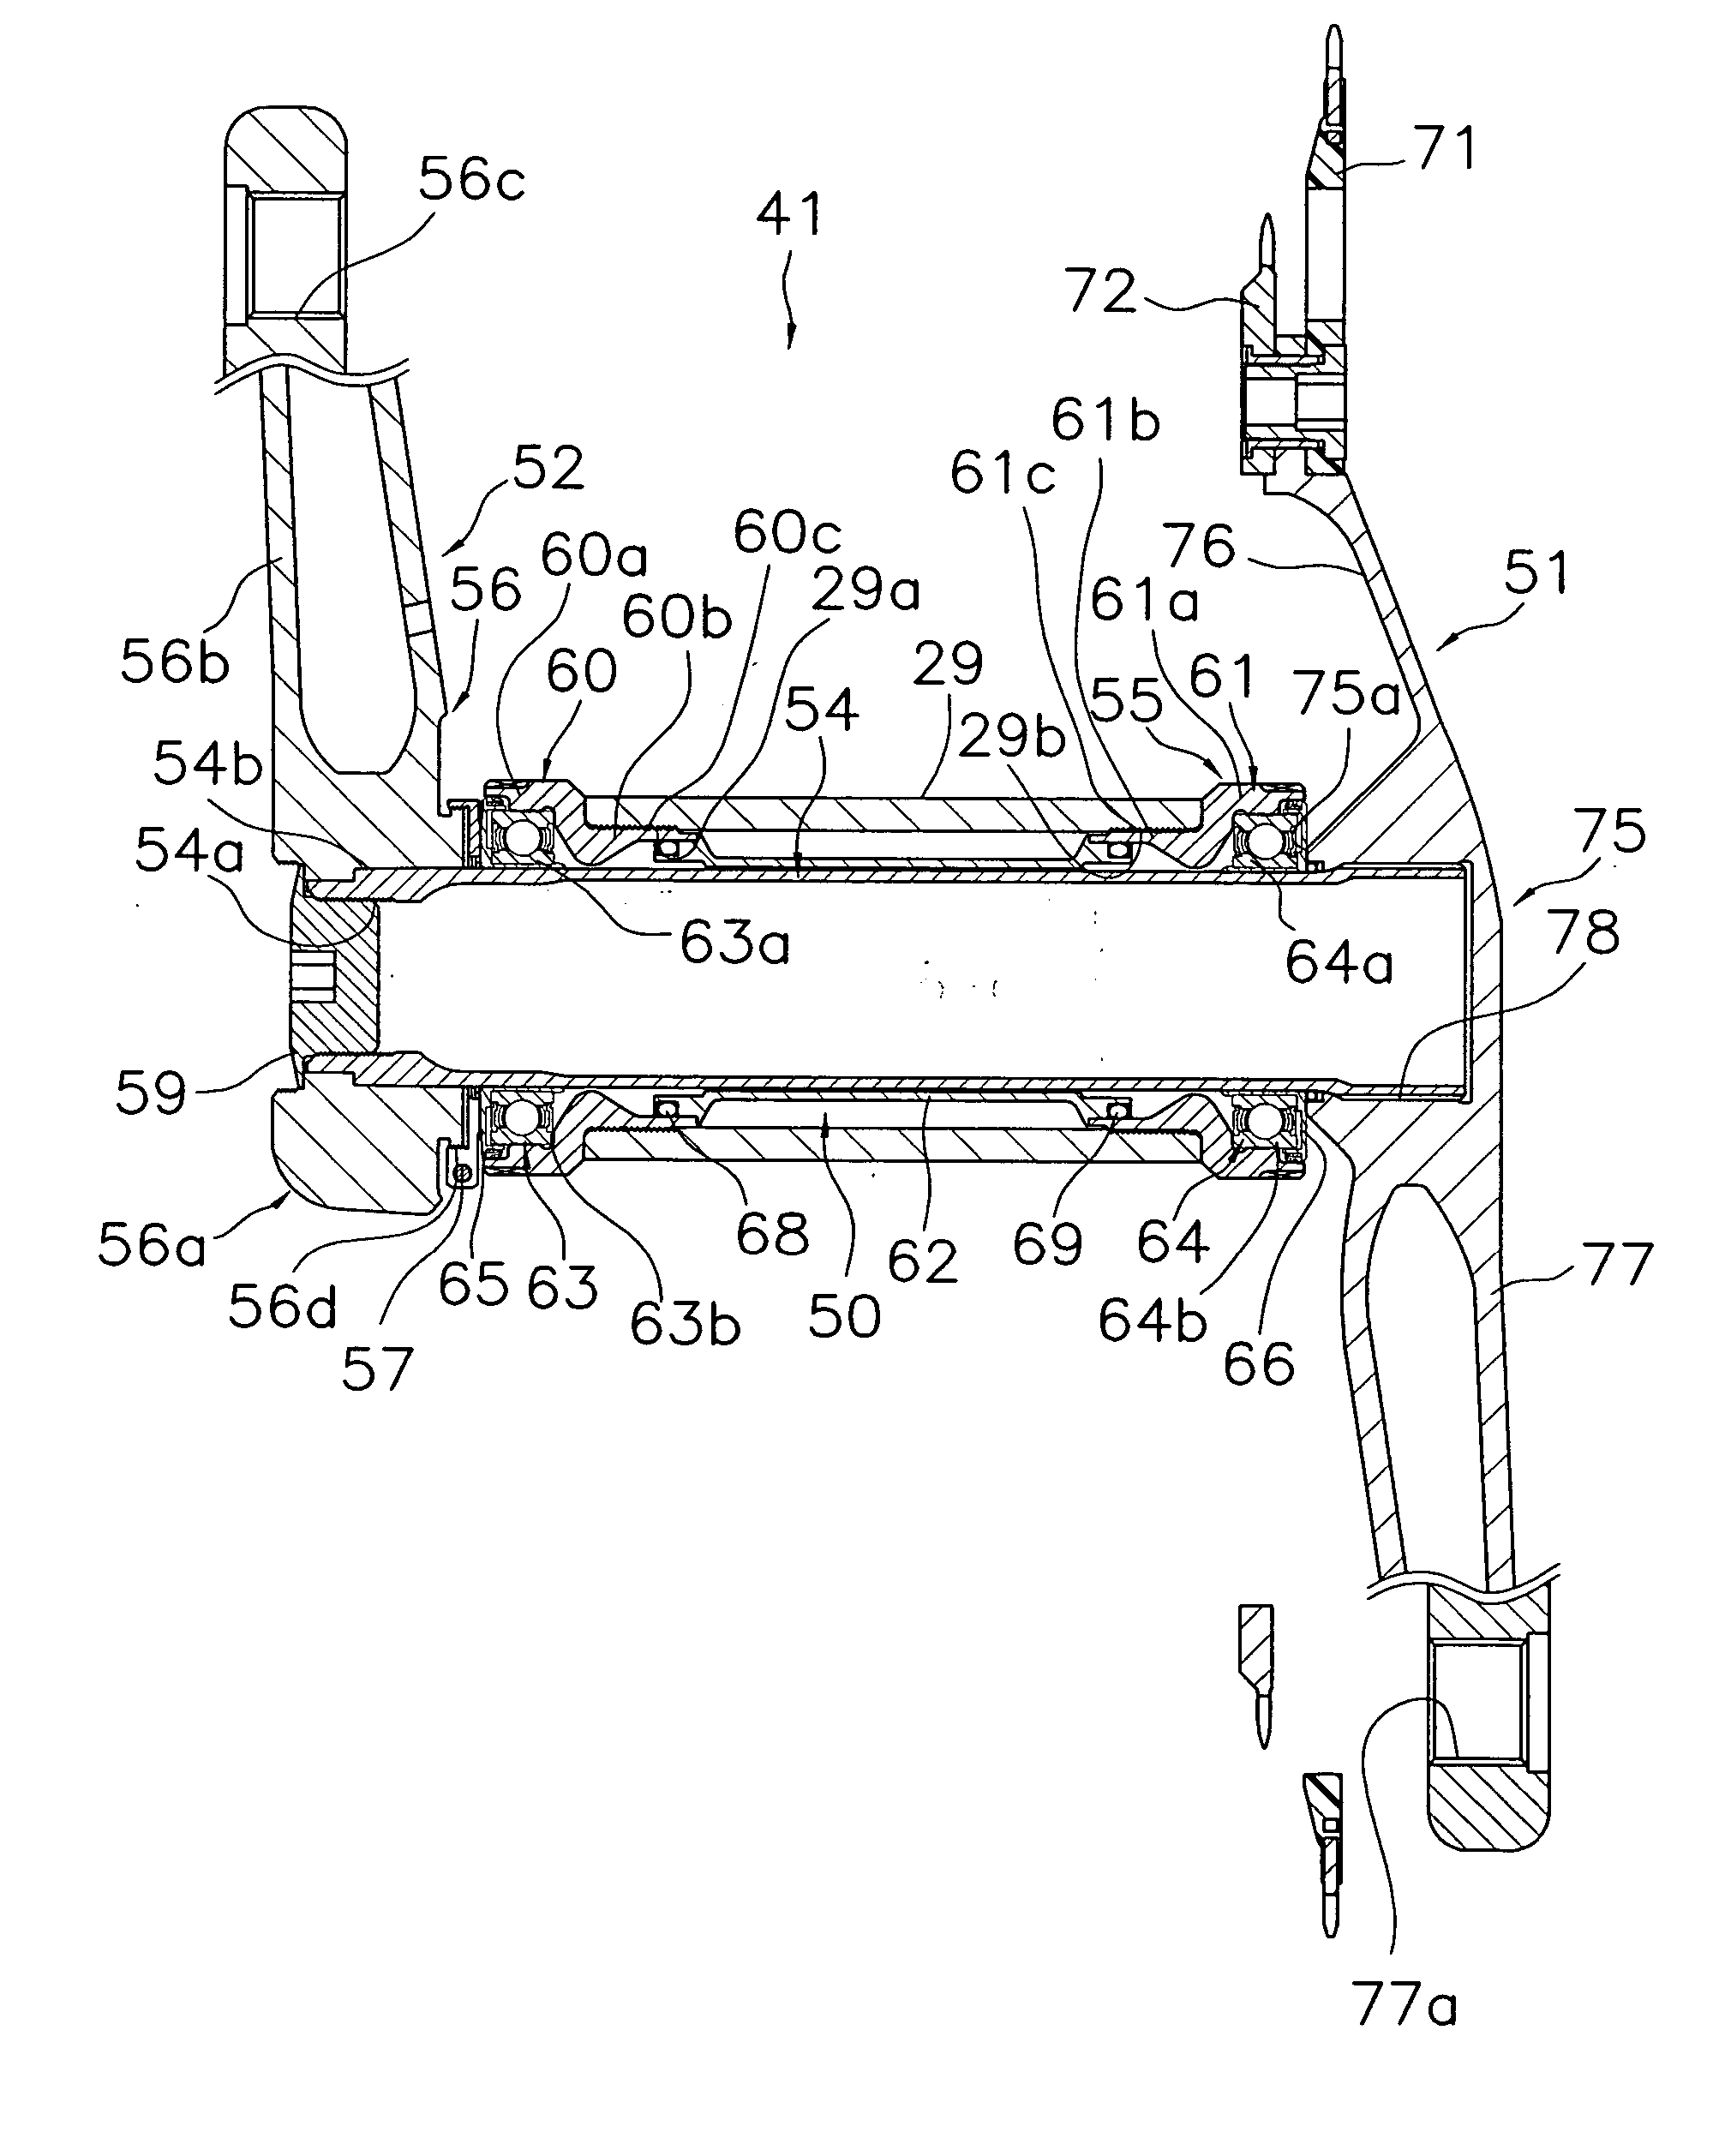 Bicycle crank assembly